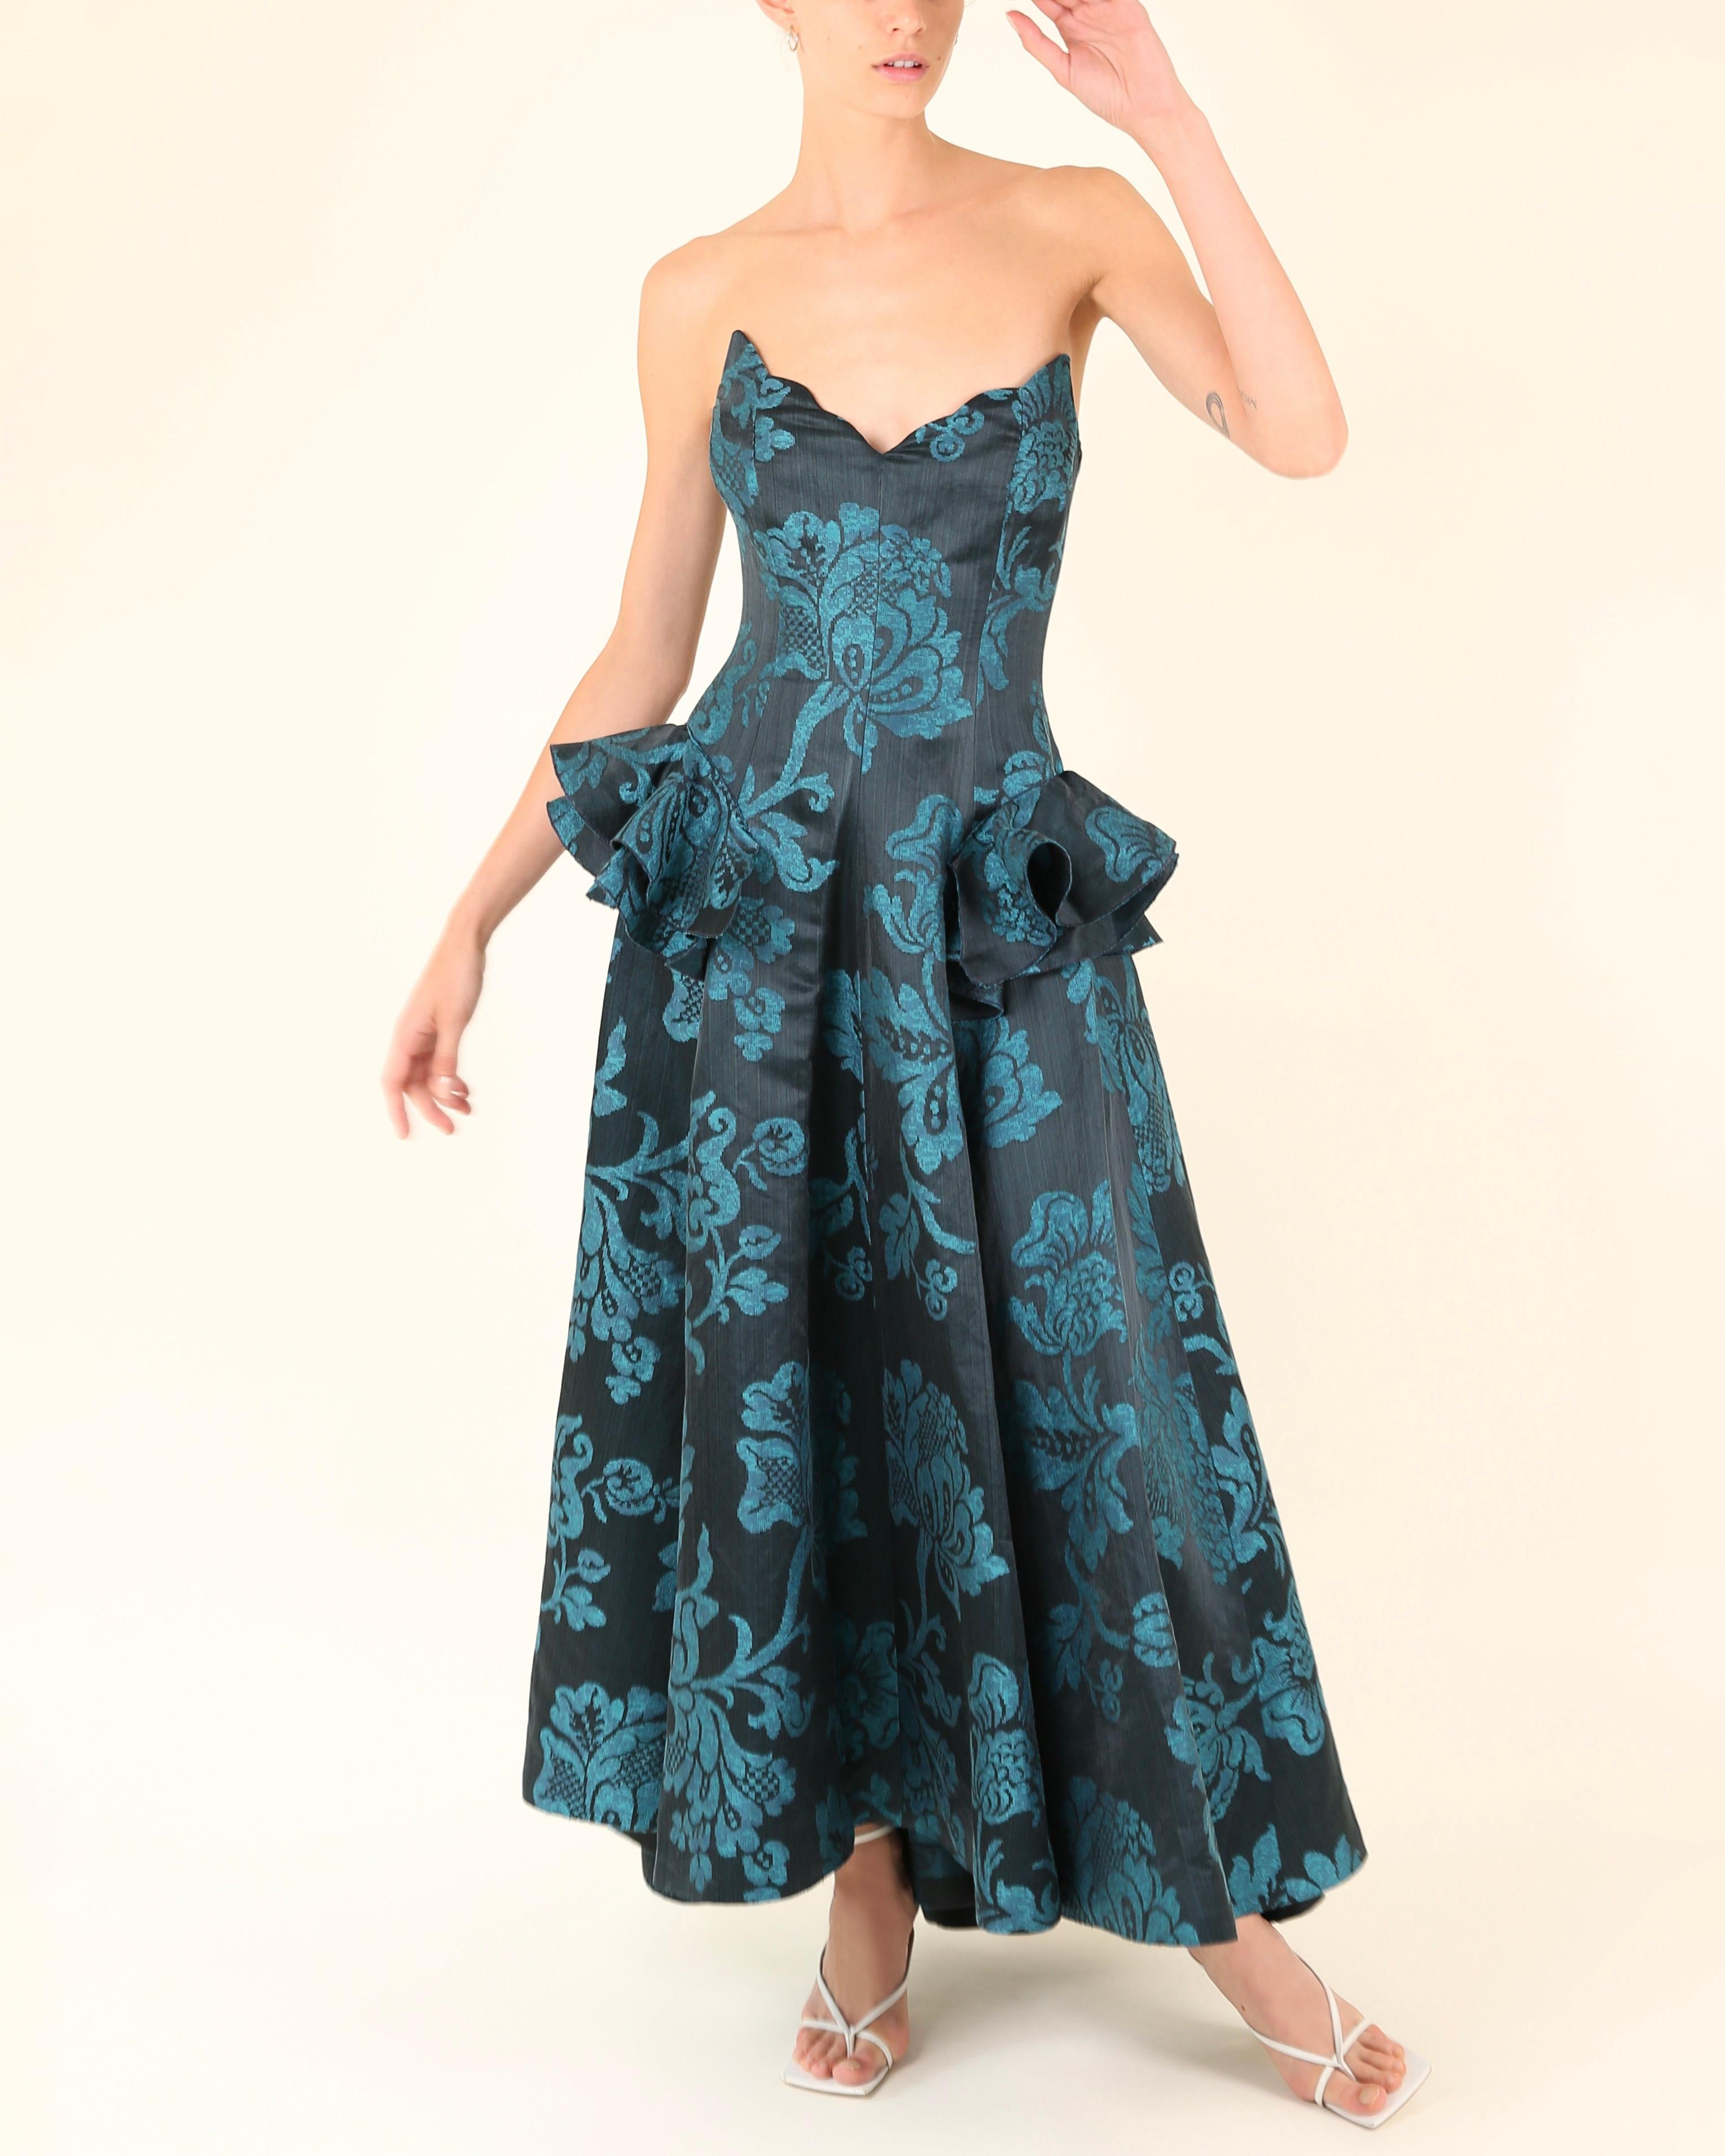 Oscar de la Renta F/W06 strapless floral blue teal fit and flare dress gown XS For Sale 3